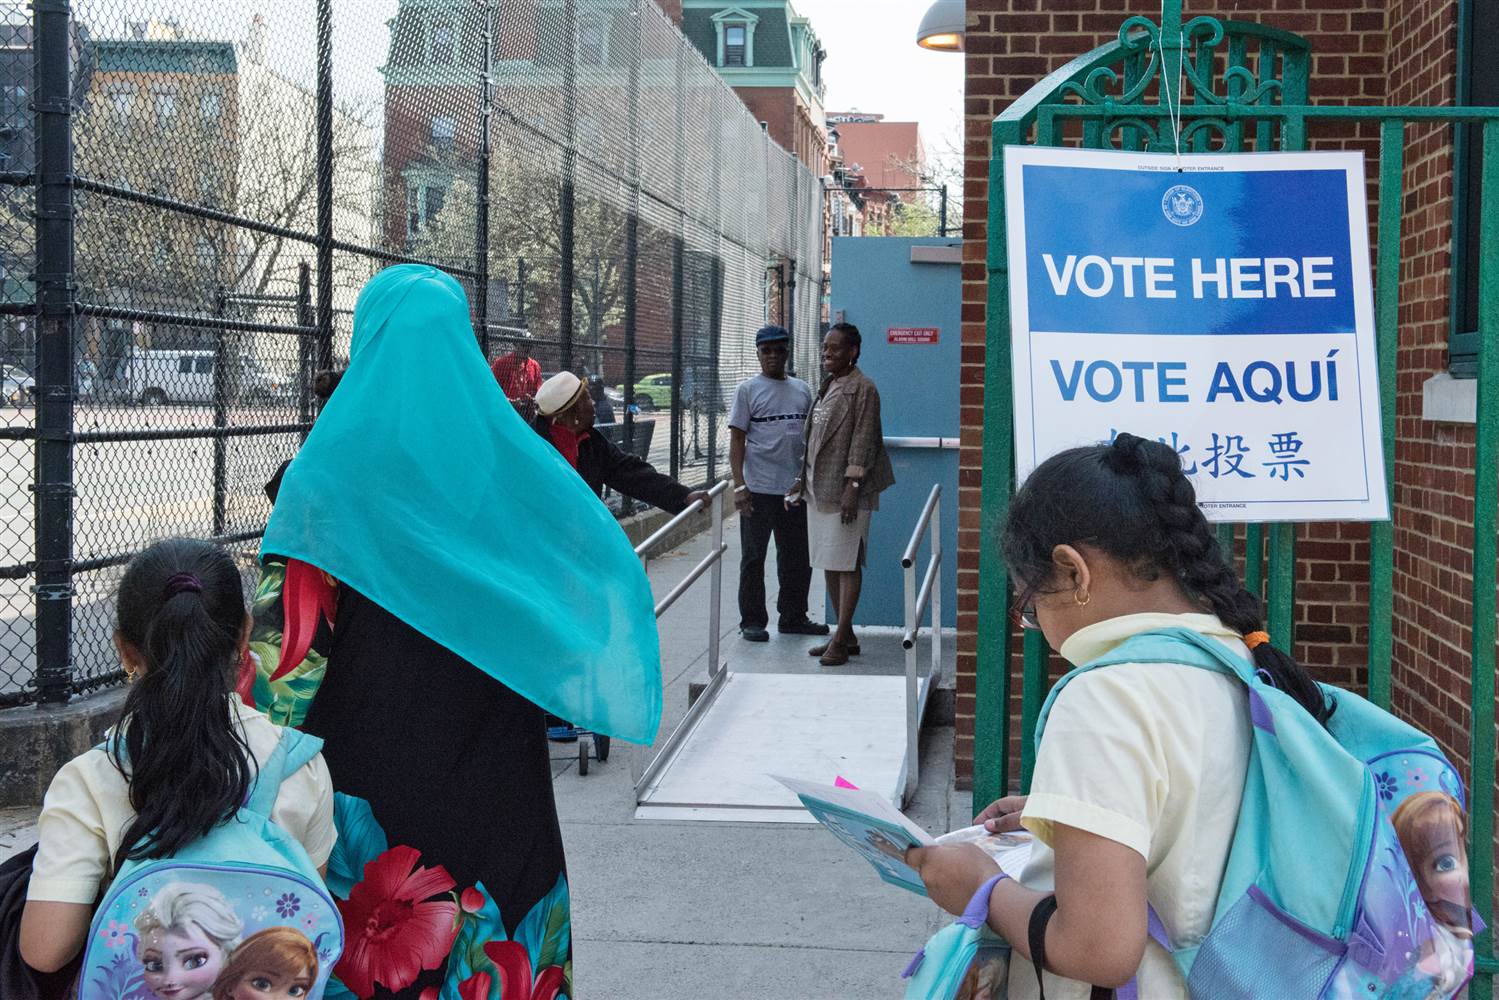 A woman with a Muslim headscarf walks past a voting sign on April 19 in Brooklyn, New York. Stephanie Keith / Getty Images